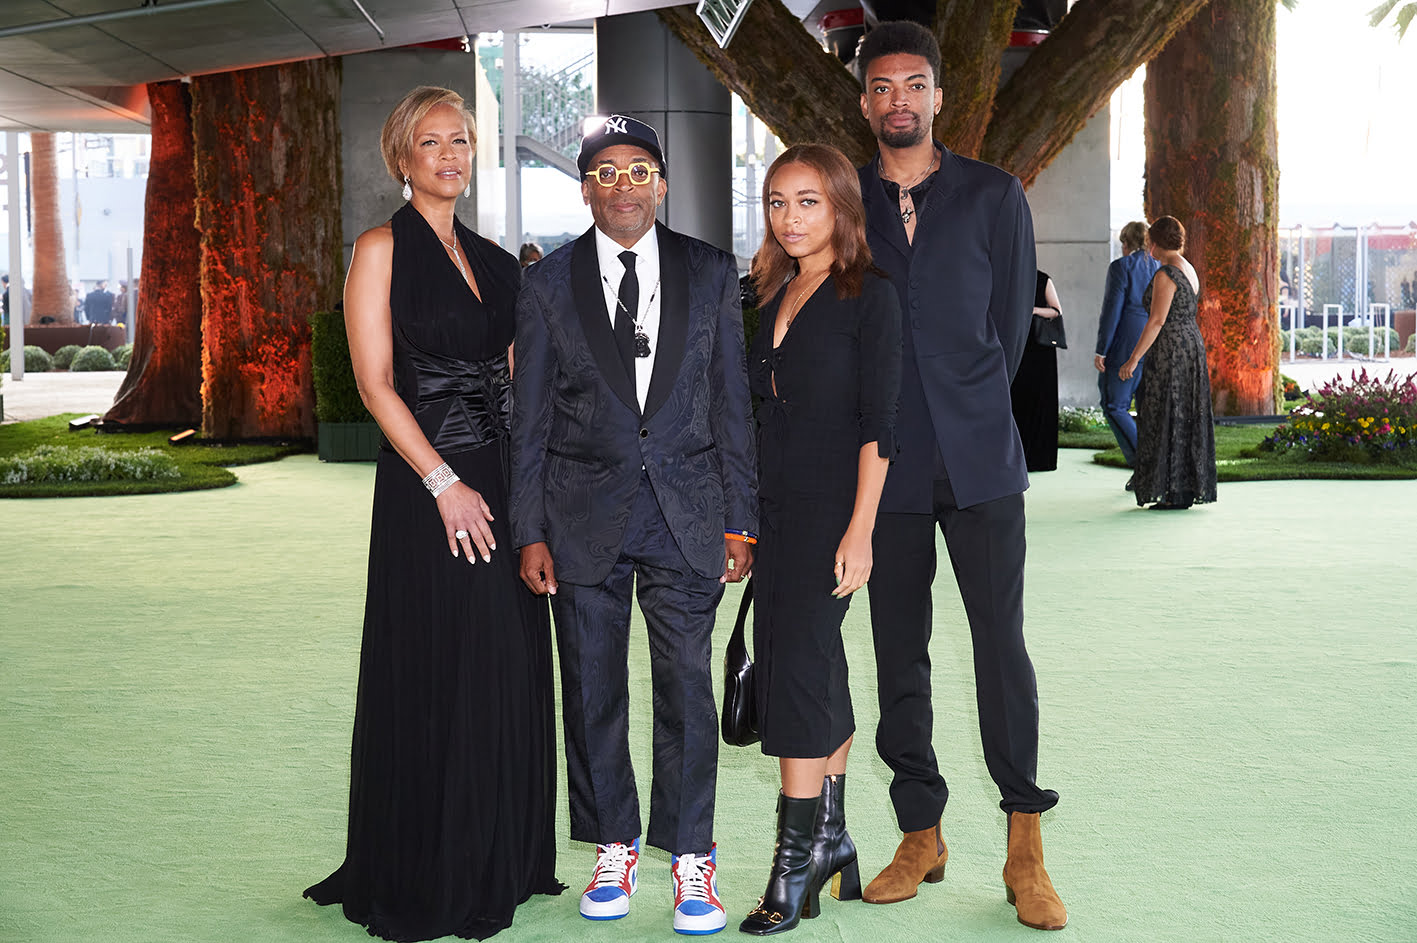 Townya Lewis Lee, Spike Lee, Satchel Lee, Jackson Lee attend the Academy Museum of Motion Pictures Opening Gala, September 25, 2021